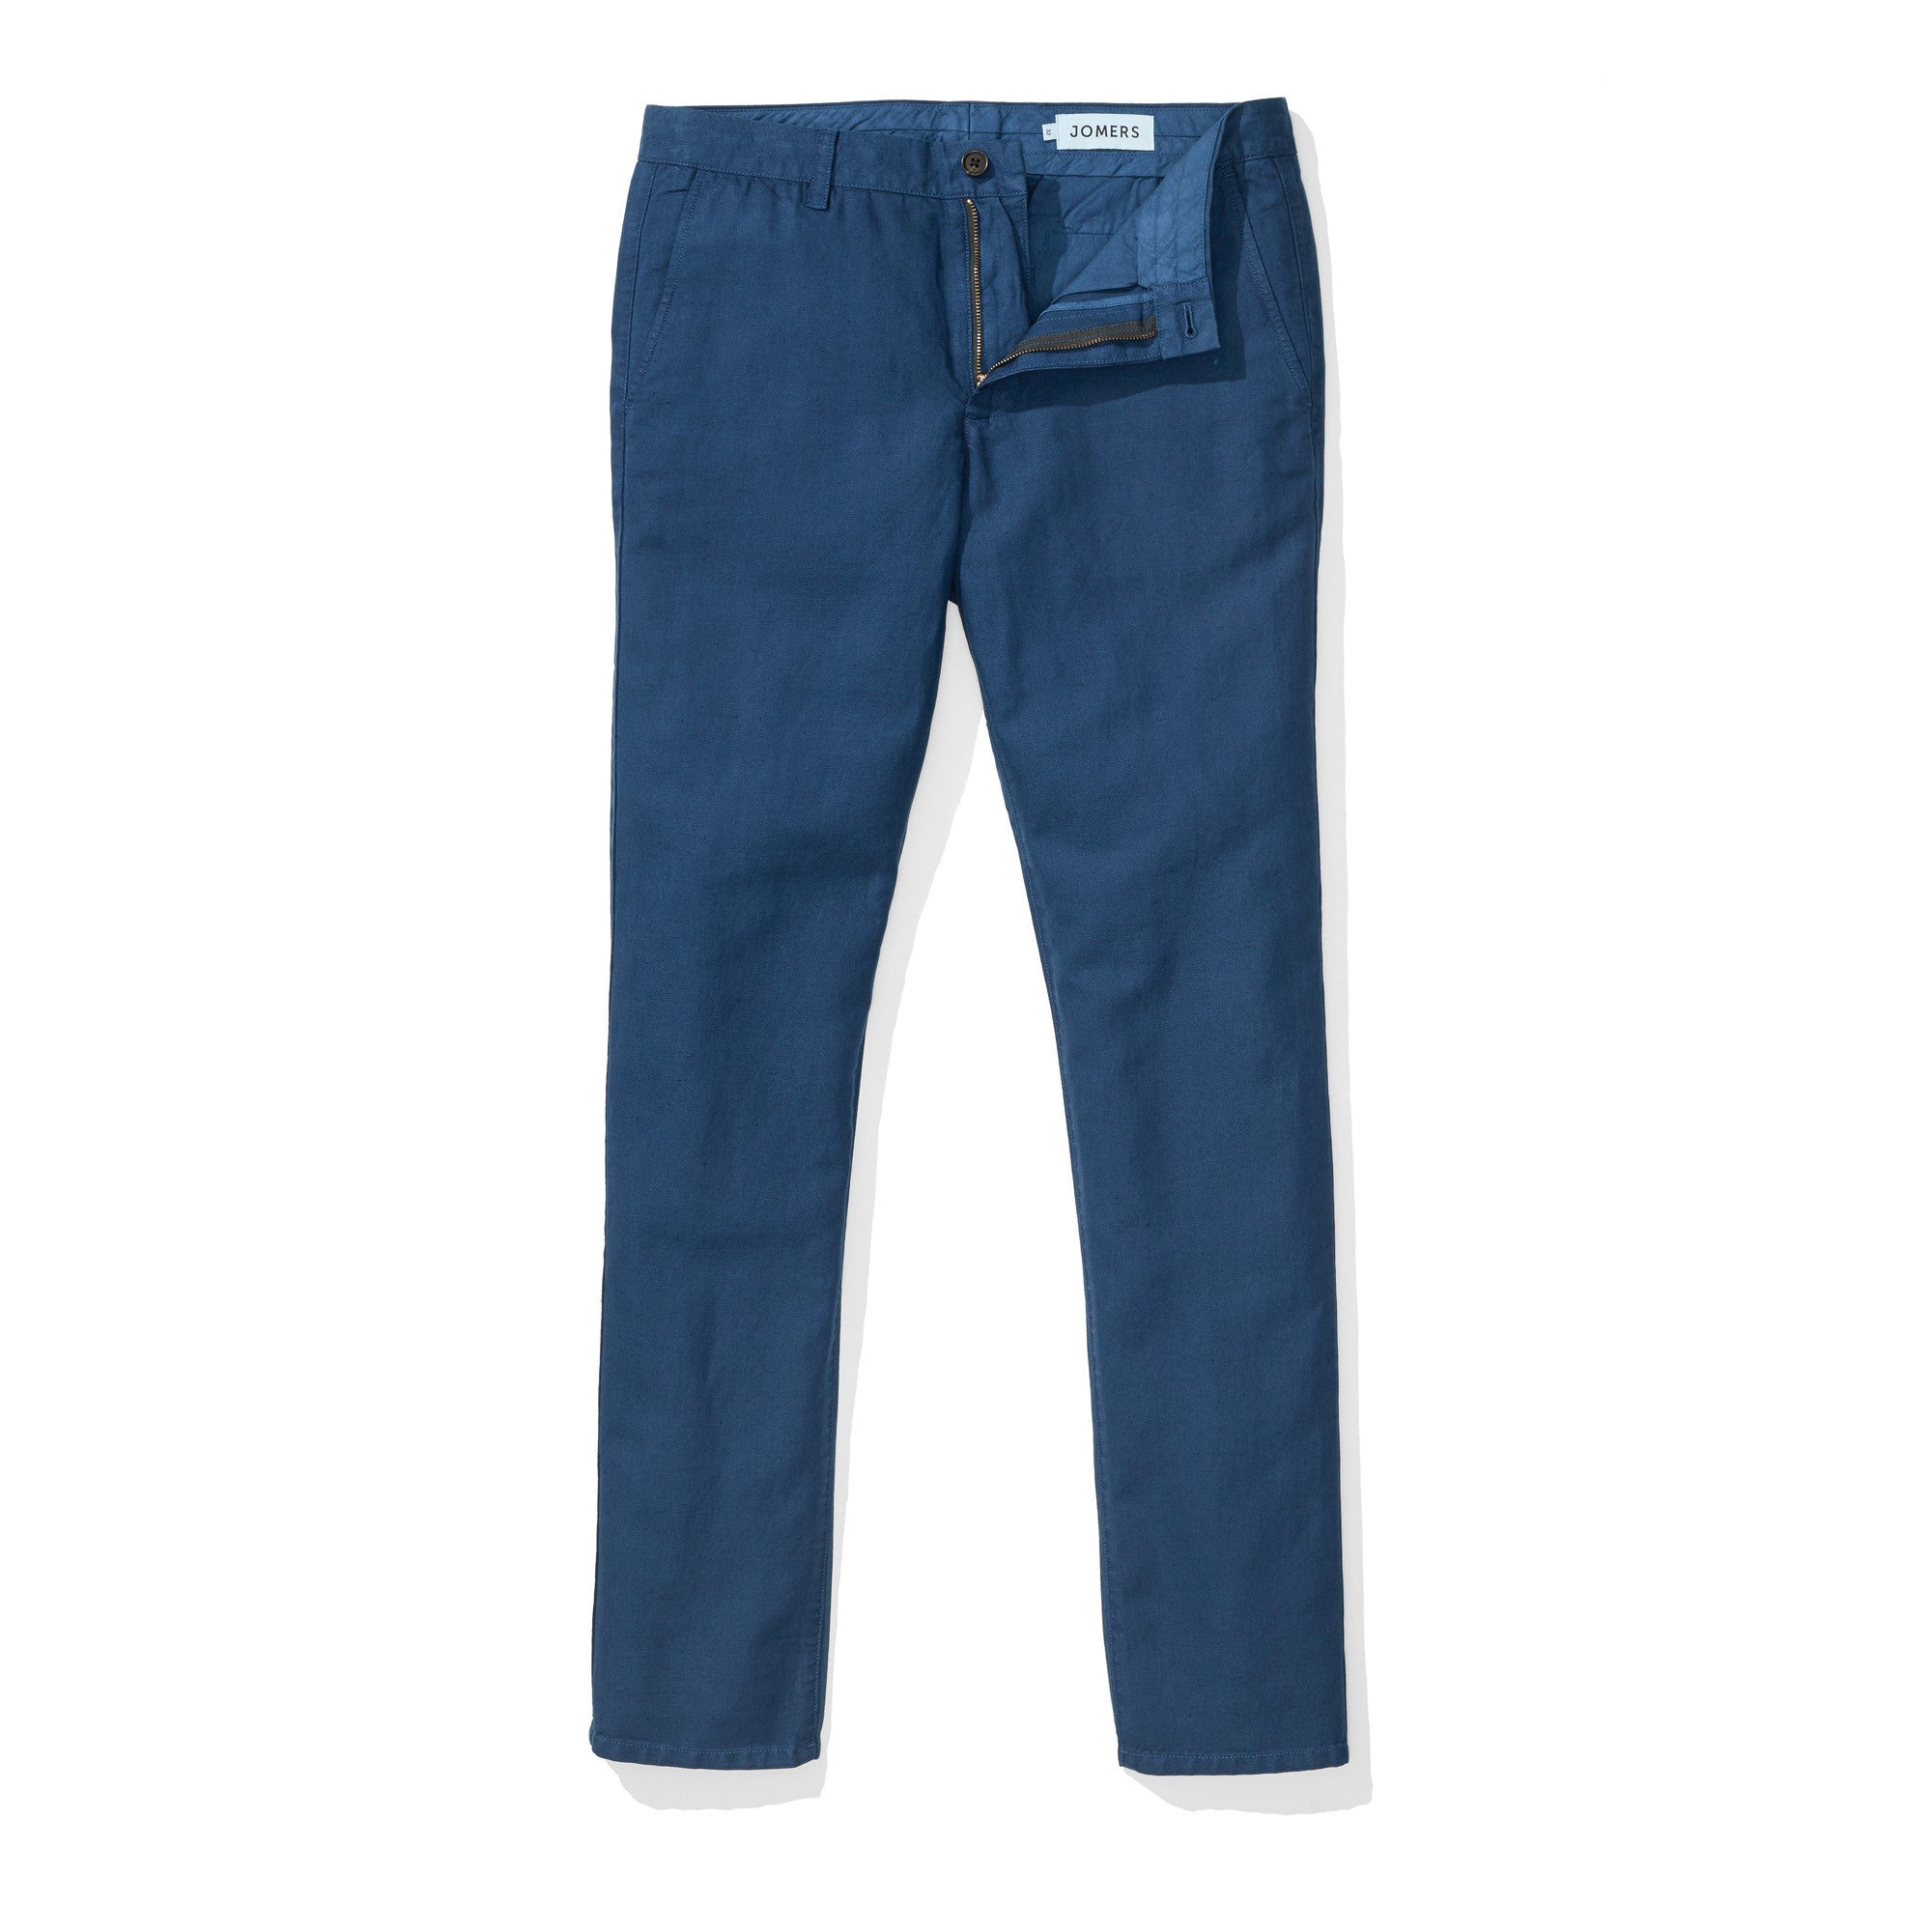 Japanese Linen Canvas Chino - Estate Blue - Jomers